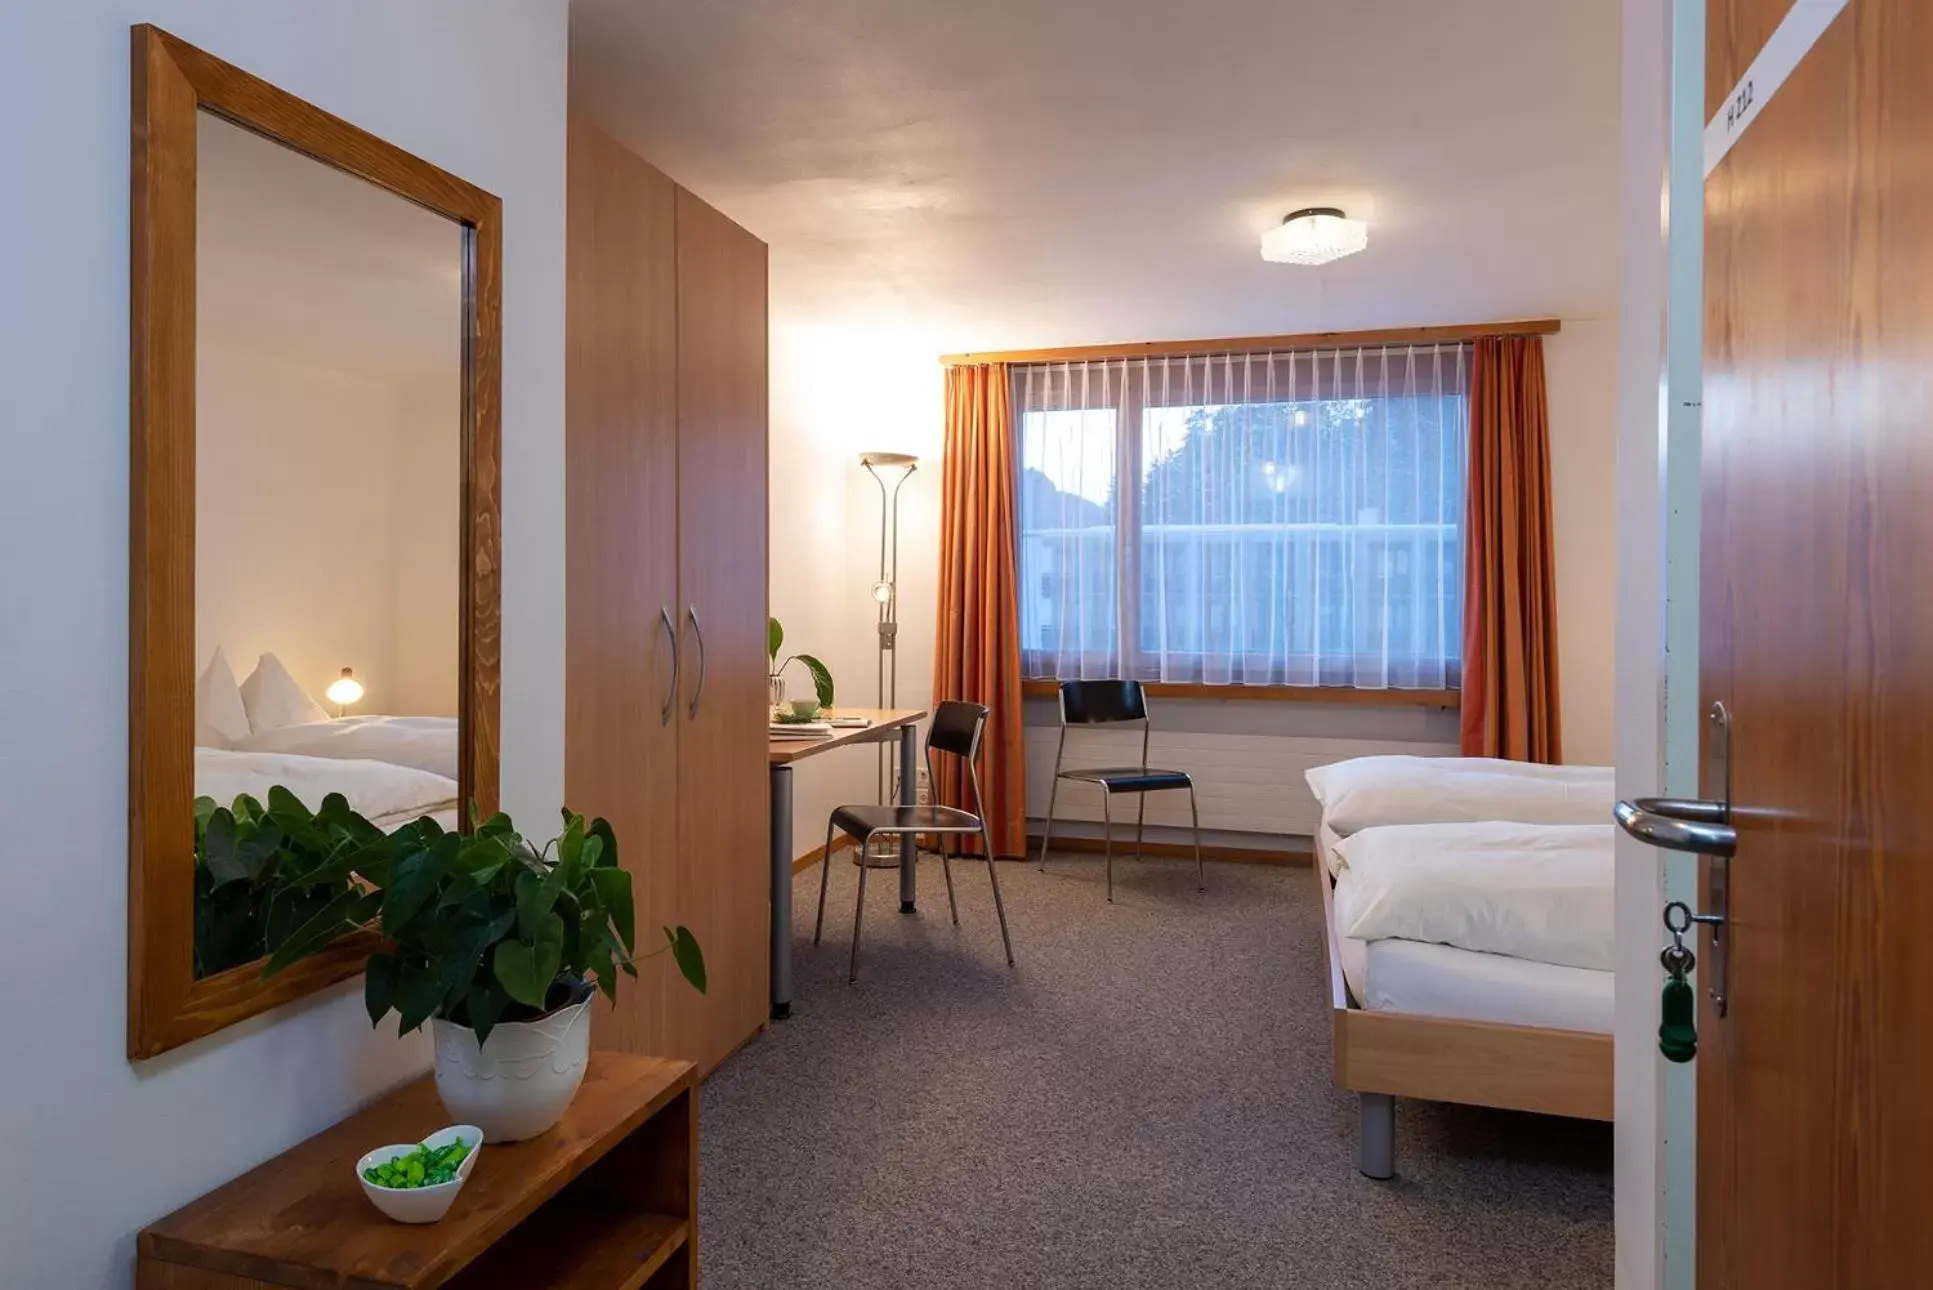 Deluxe Double Room with Shower in Haus der Begegnung im Kloster Ilanz